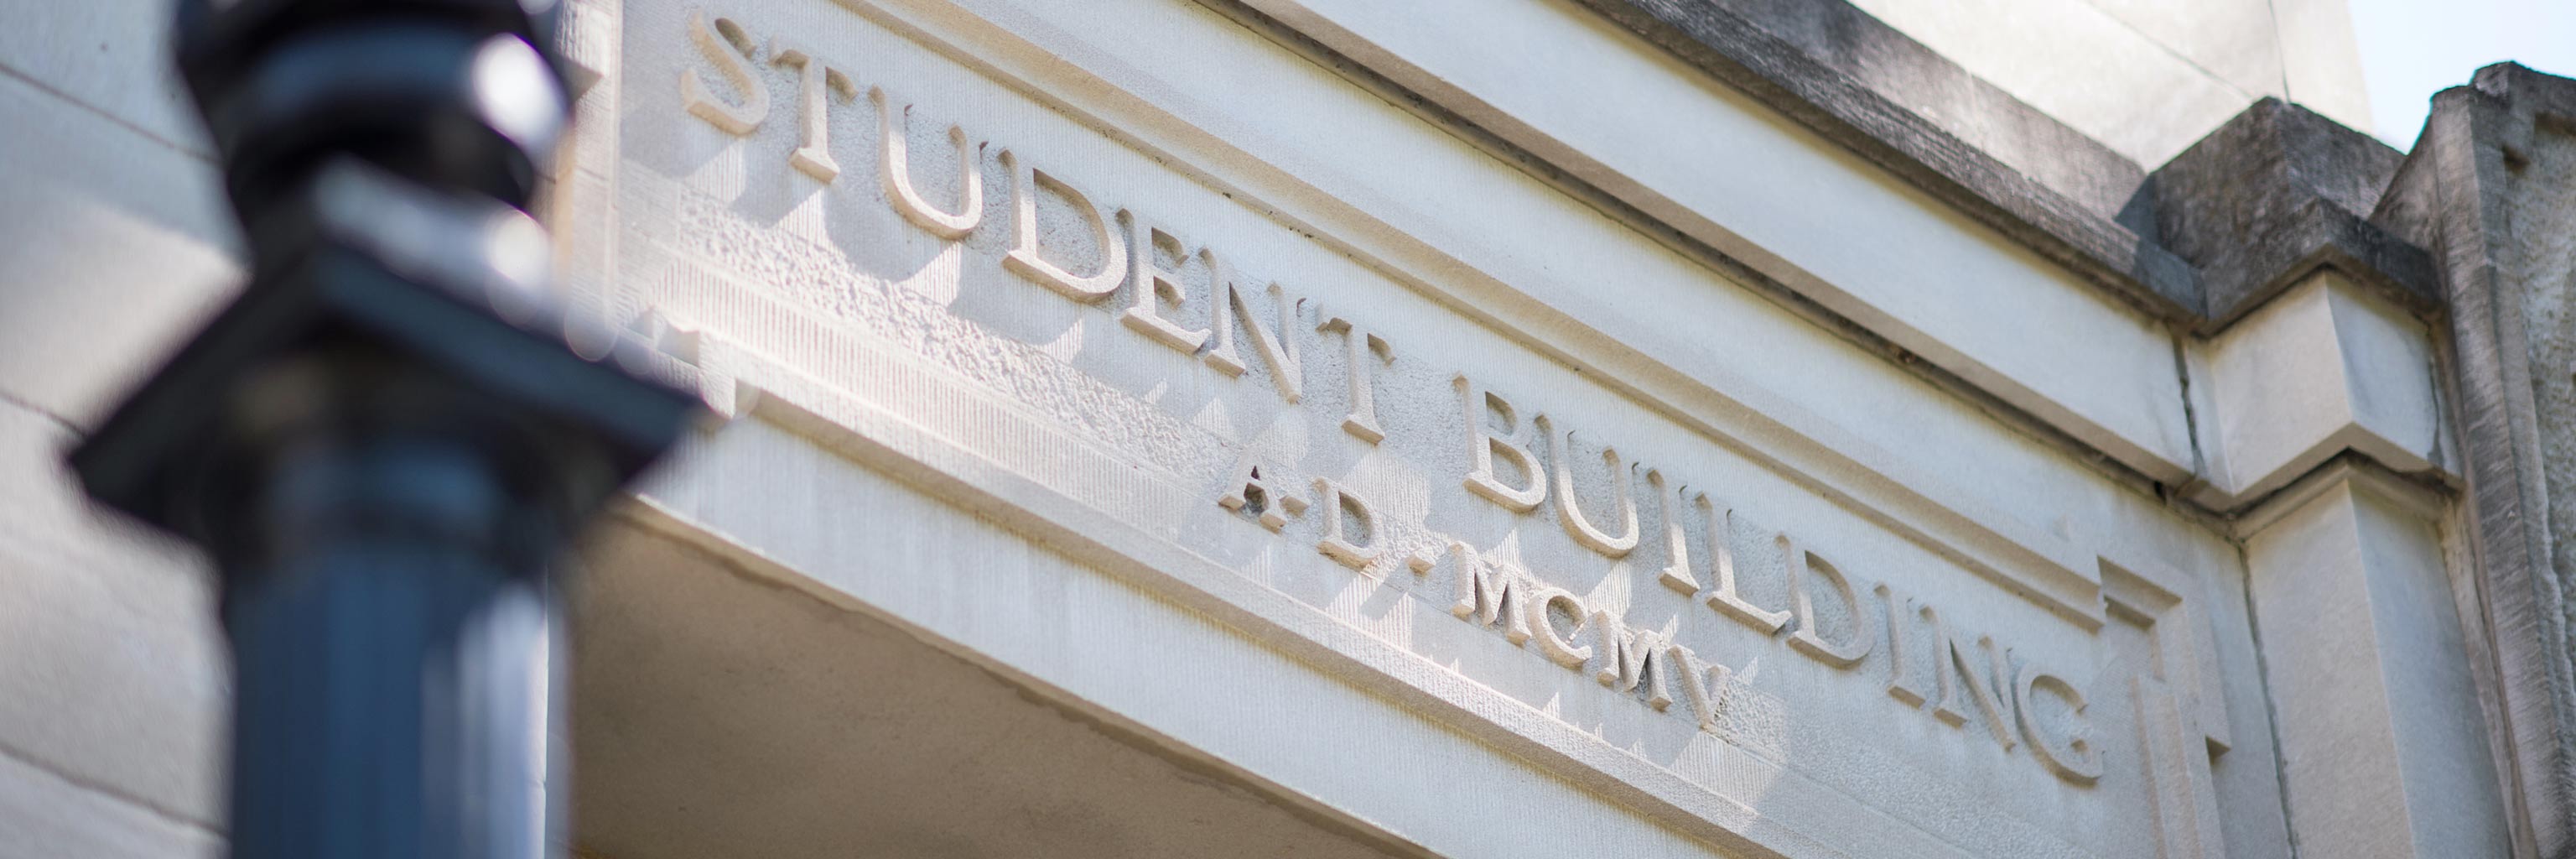 Student Building sign